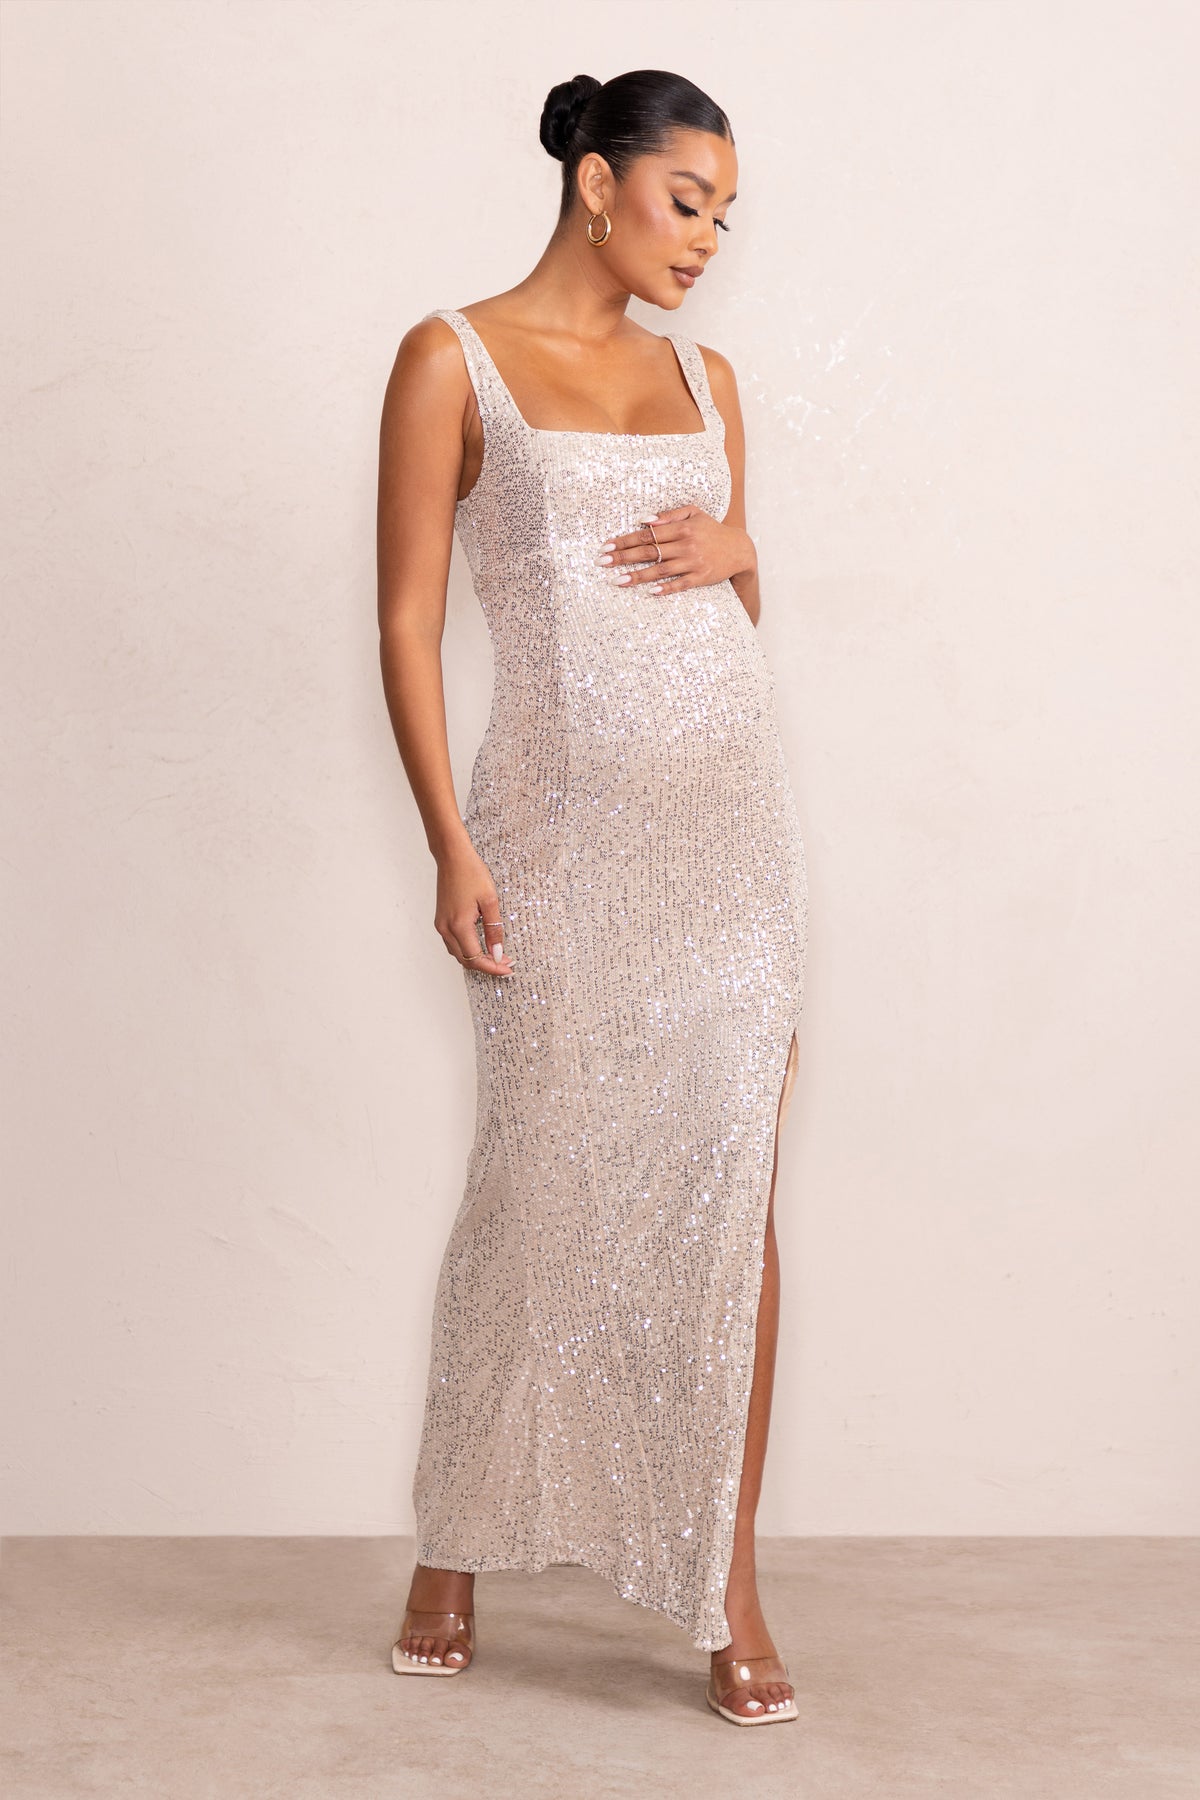 Buy Shimmer Wine Maternity Dress  Maternity Gowns Online – The Mom Store